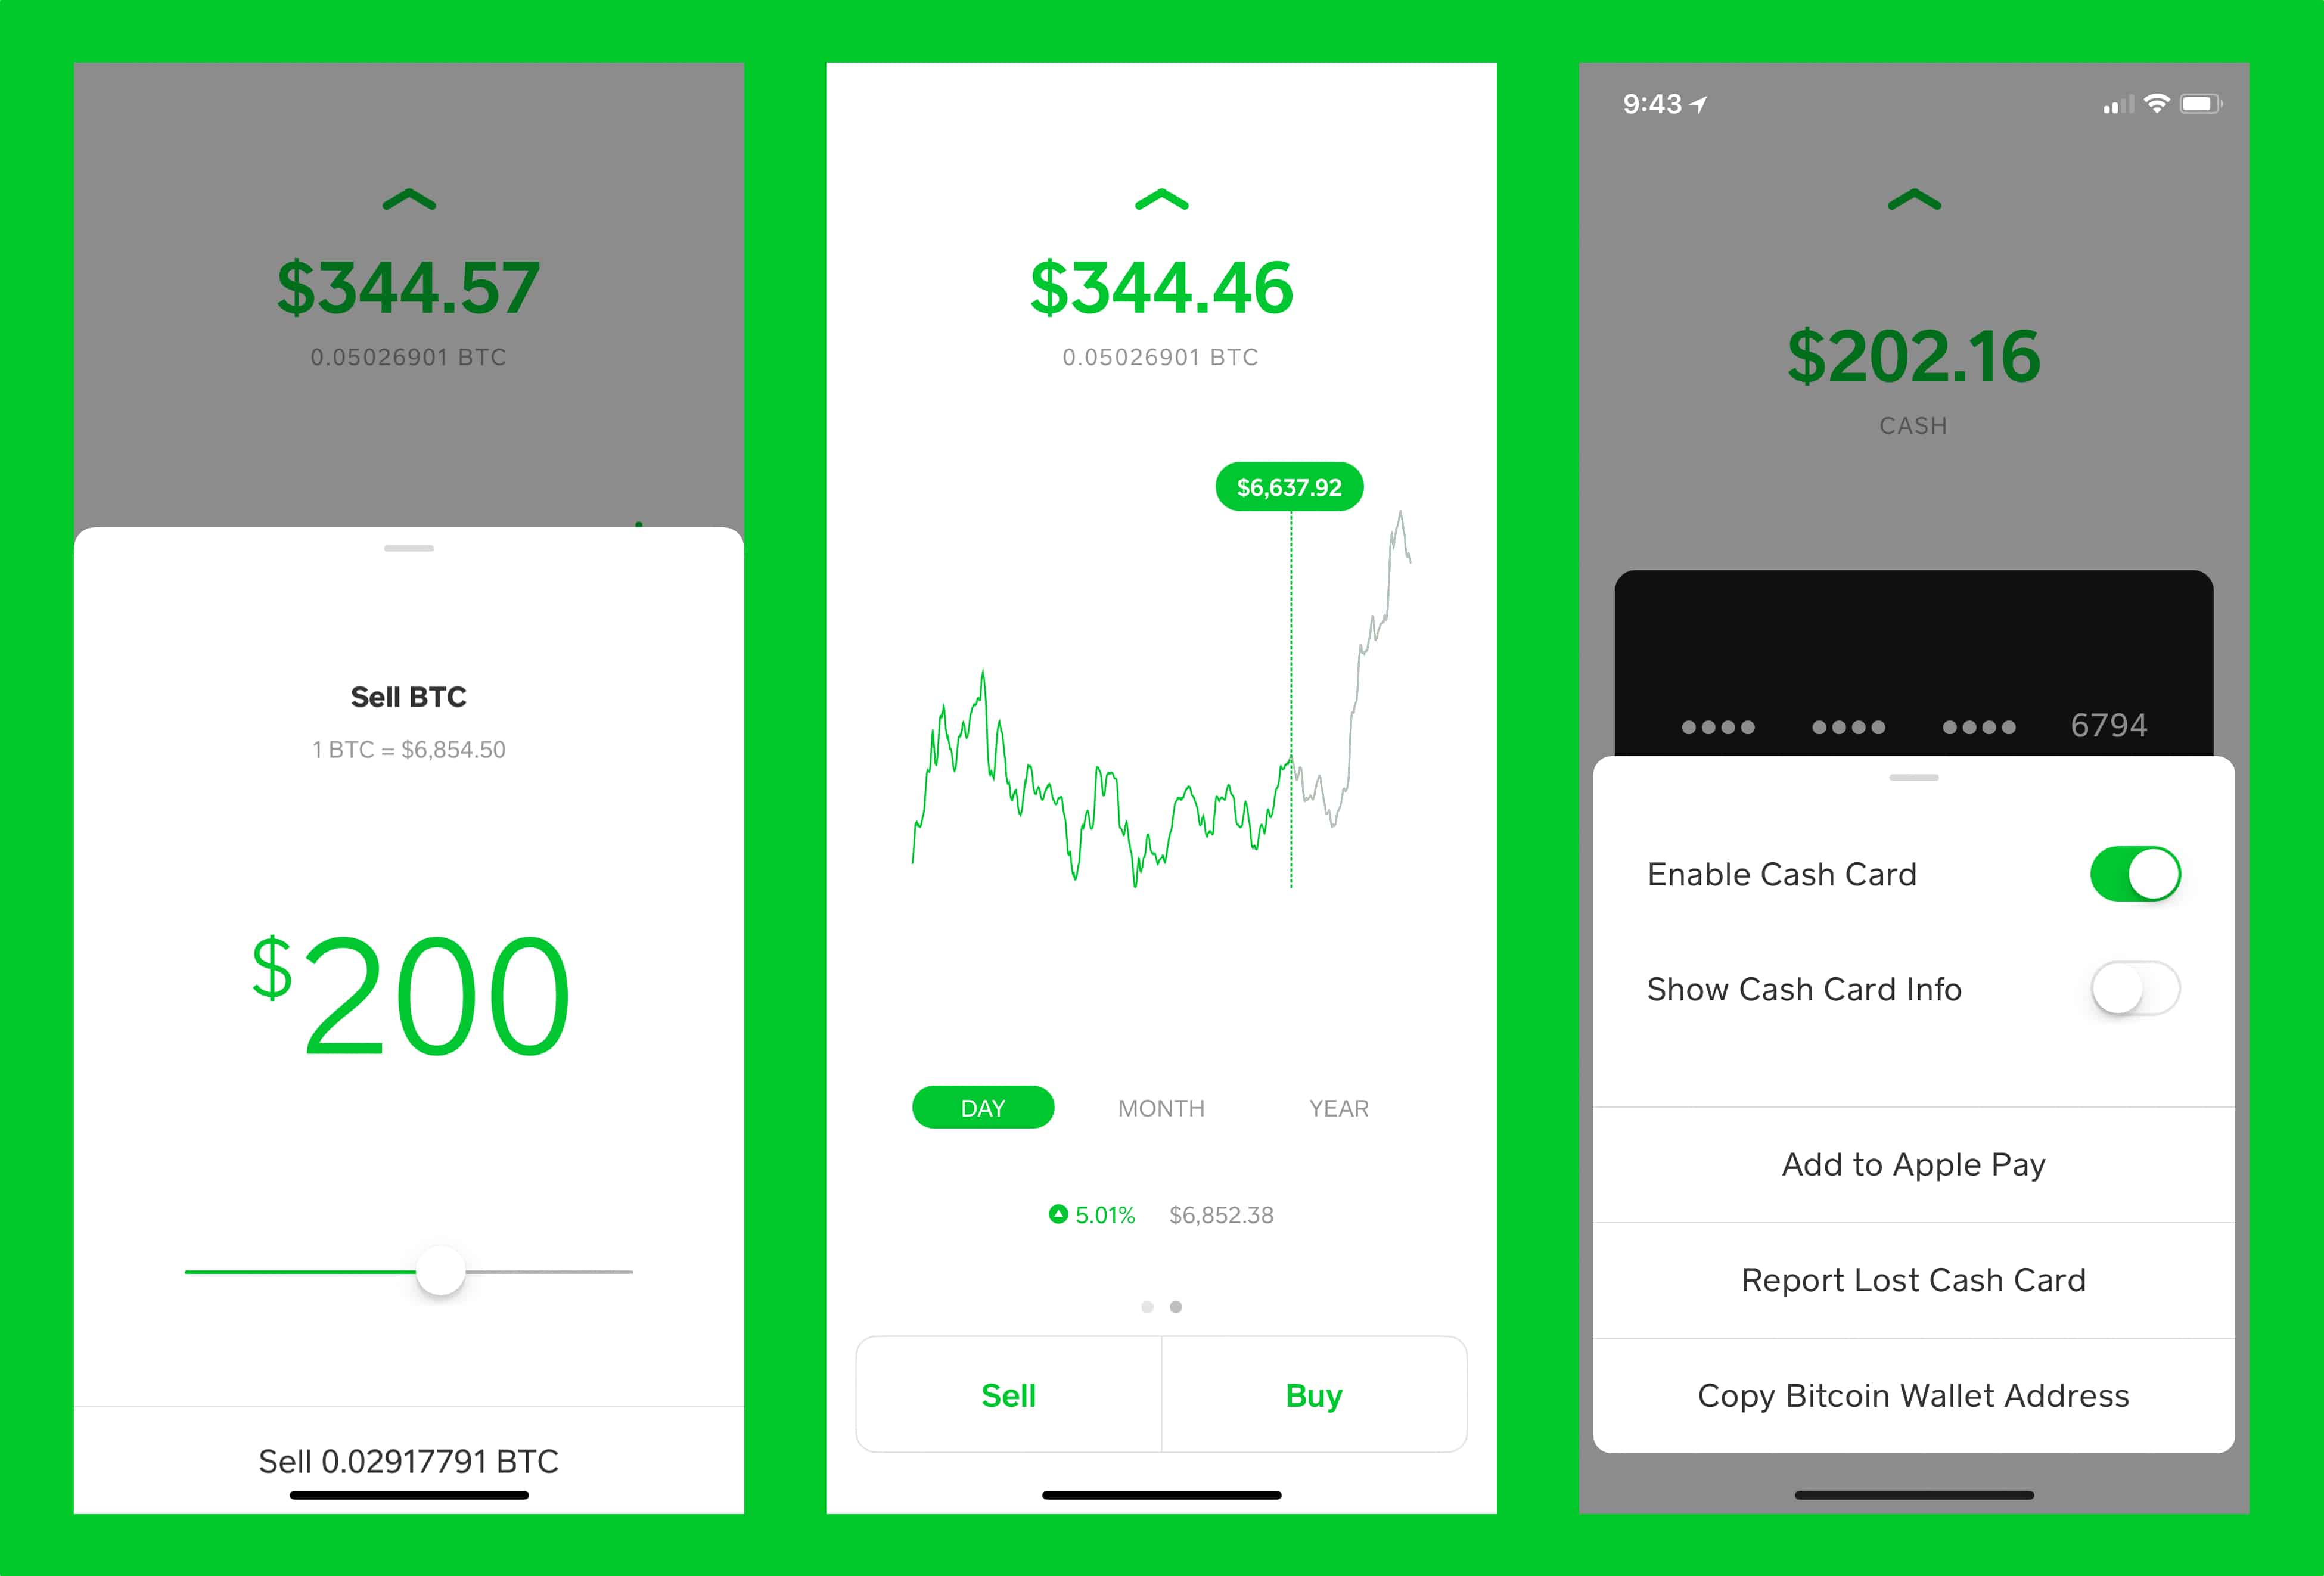 how to buy something with bitcoin in cash app